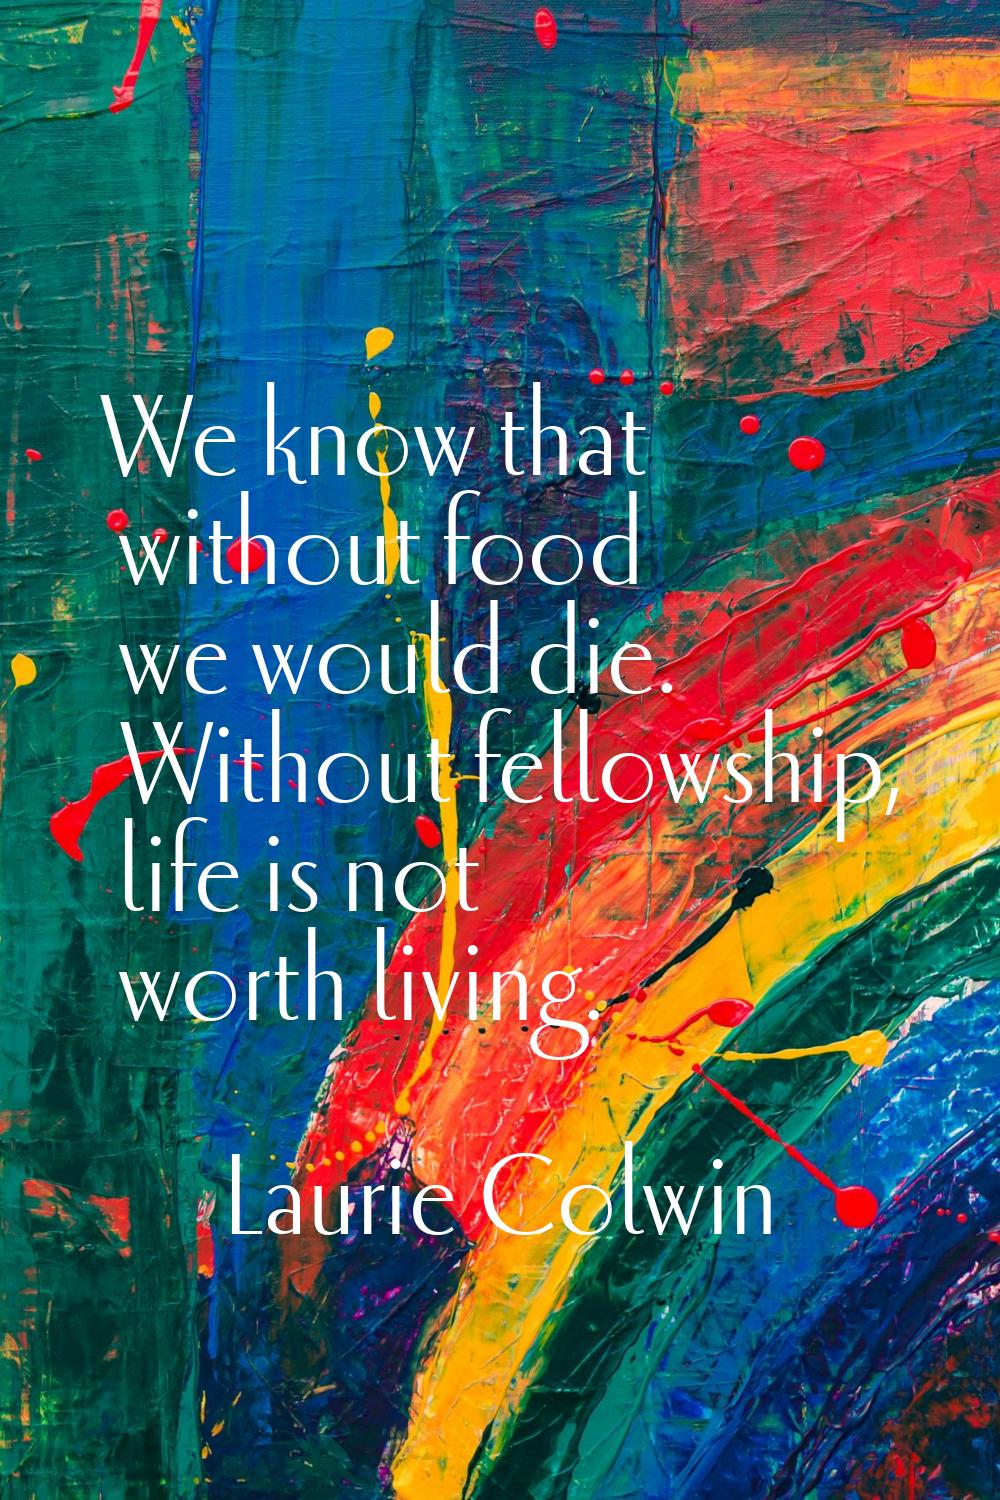 We know that without food we would die. Without fellowship, life is not worth living.